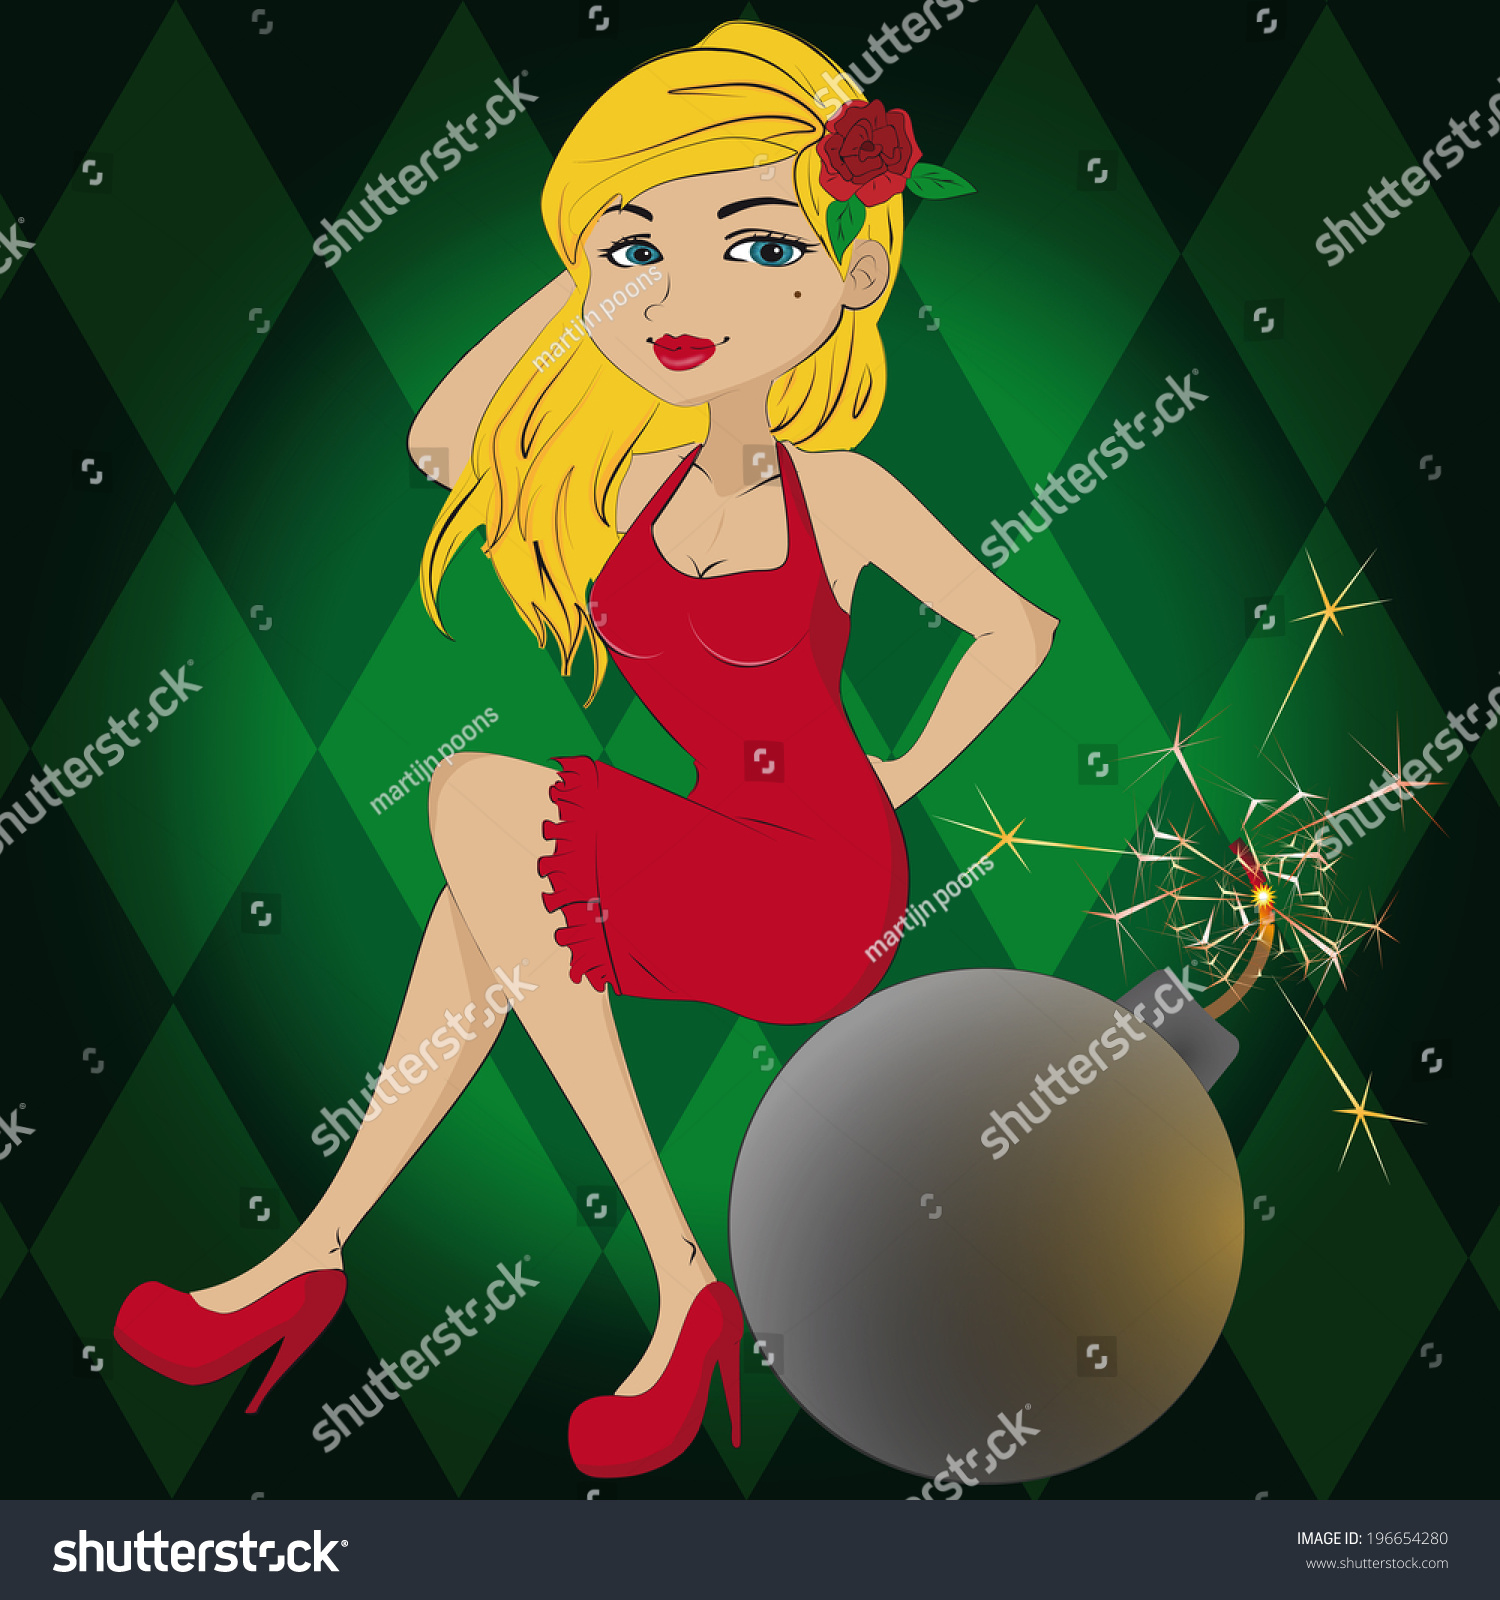 Sexy Pin Girl Sitting On Bomb Stock Vector Royalty Free 196654280 Shutterstock 